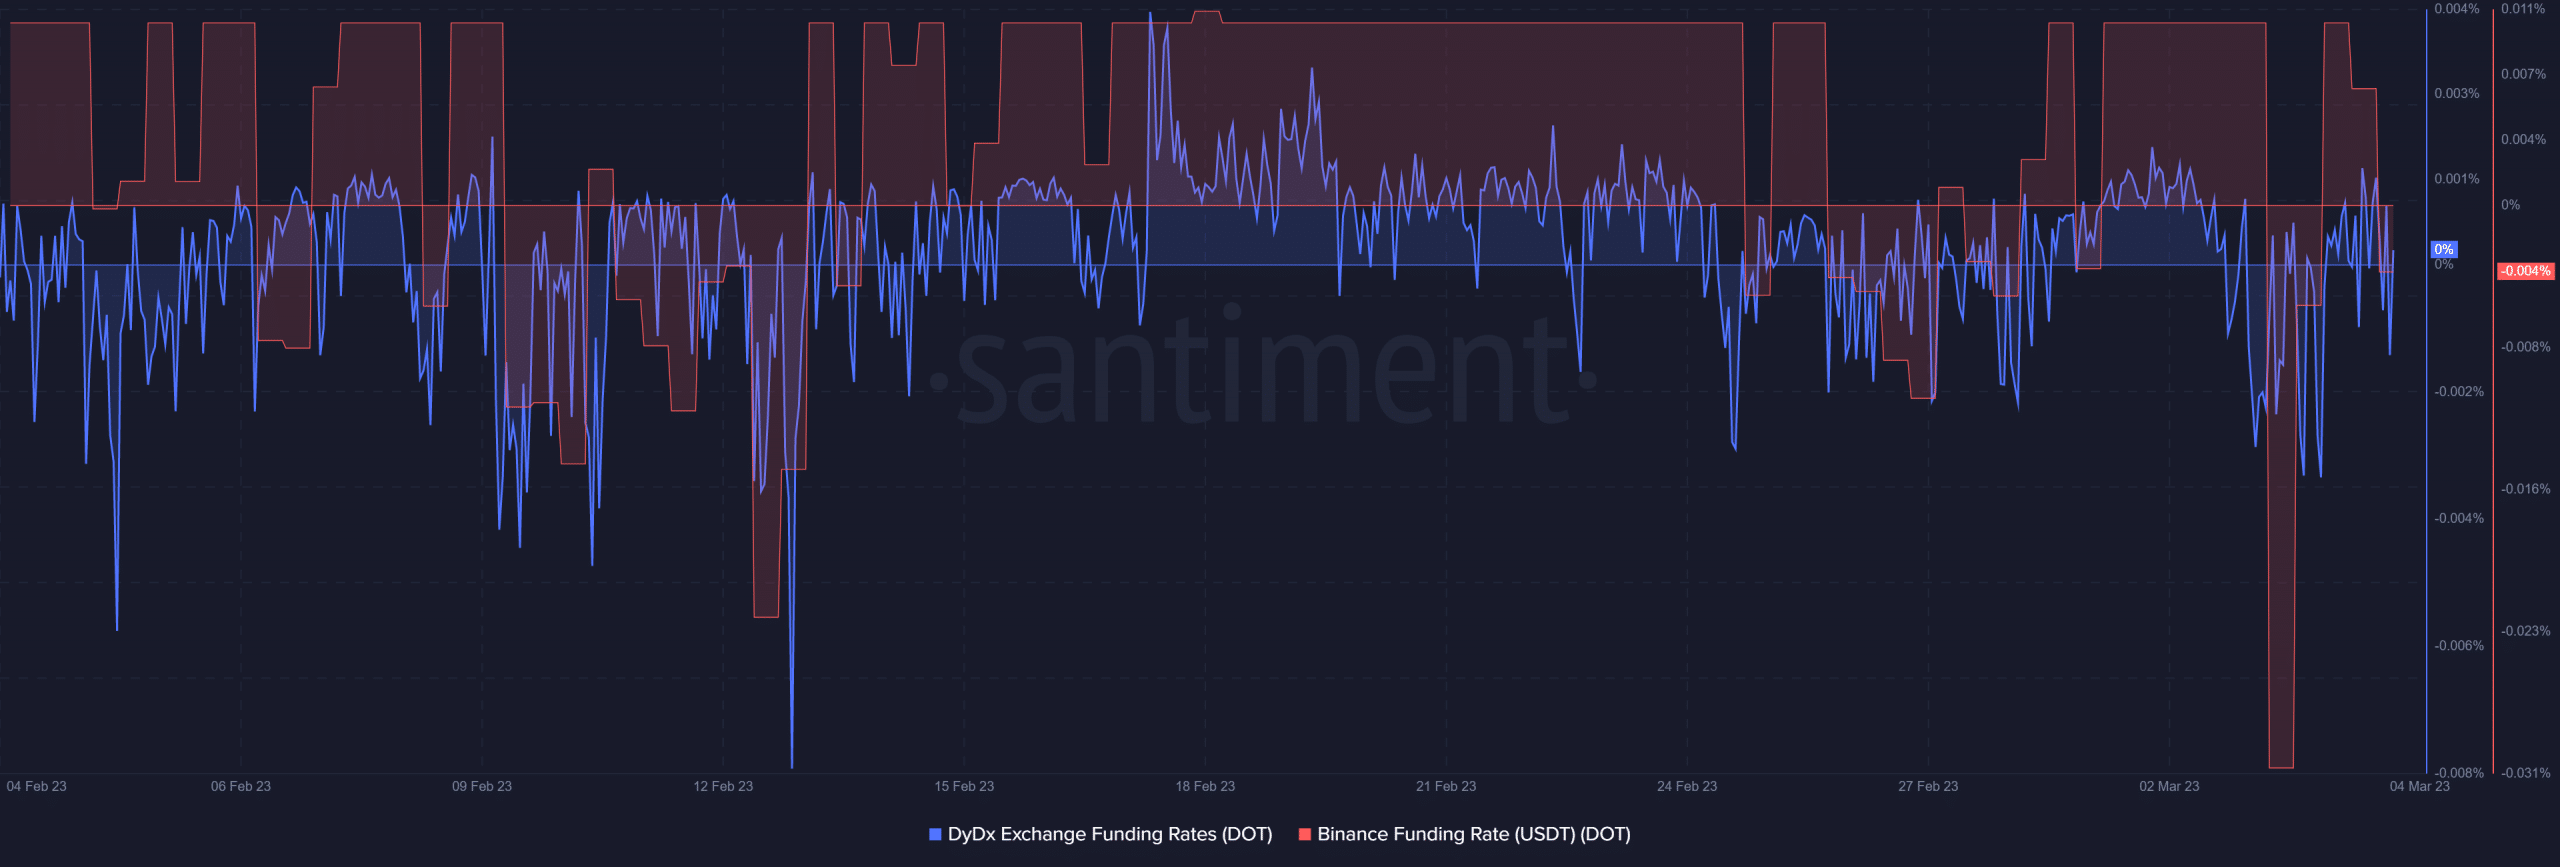 Polkadot social volume and weighted sentiment